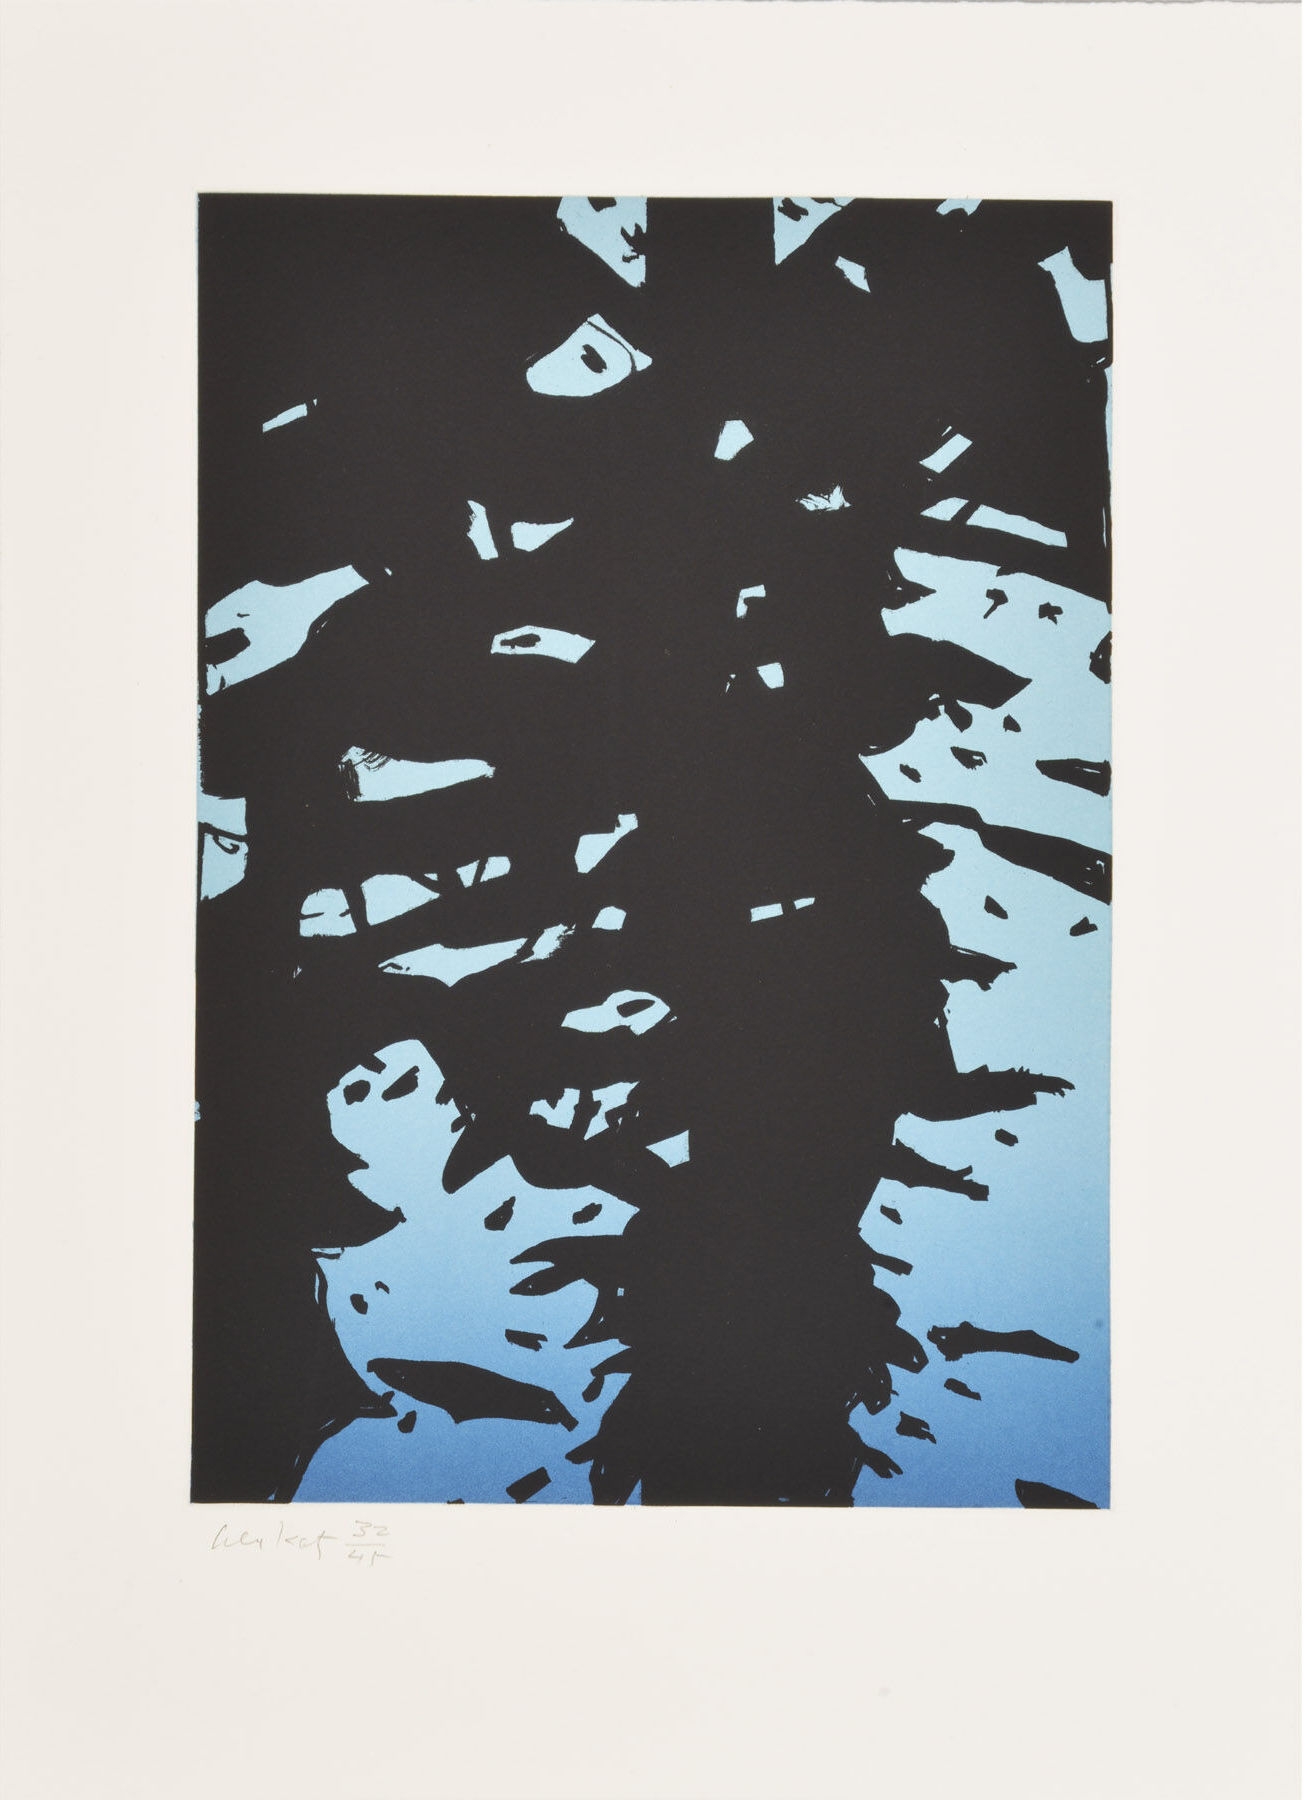 Alex Katz
Reflection I, 2010
Etching
18 1/2 x 13 1/2 inches&nbsp;(47 x 34.3 cm)
Edition of 45 + proofs

Inquire